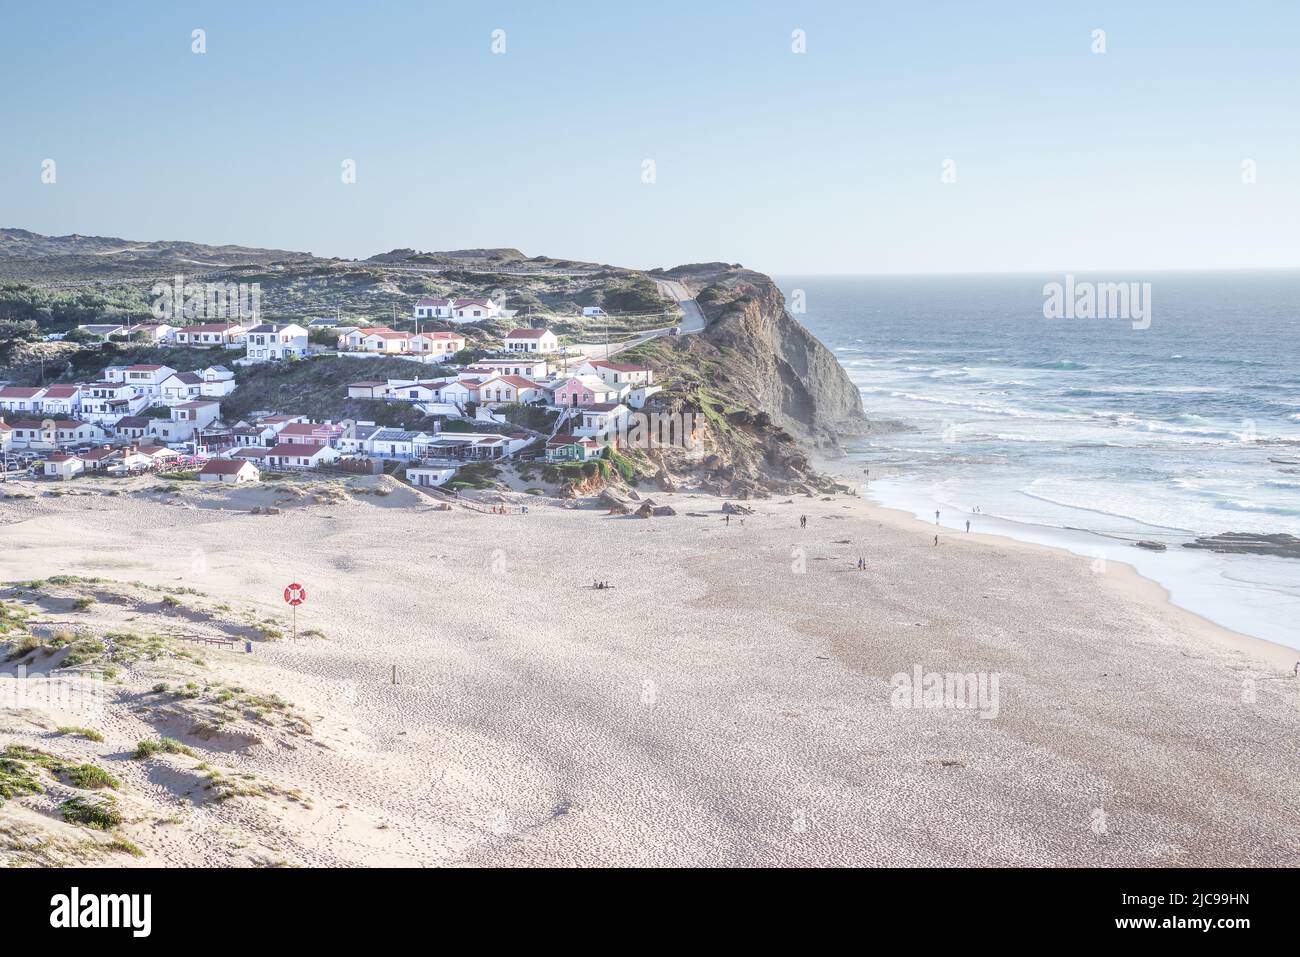 The pretty town of Praia de Monte Clérigo and the adjacent beach basking in the late afternoon sun - Algarve, Portugal Stock Photo